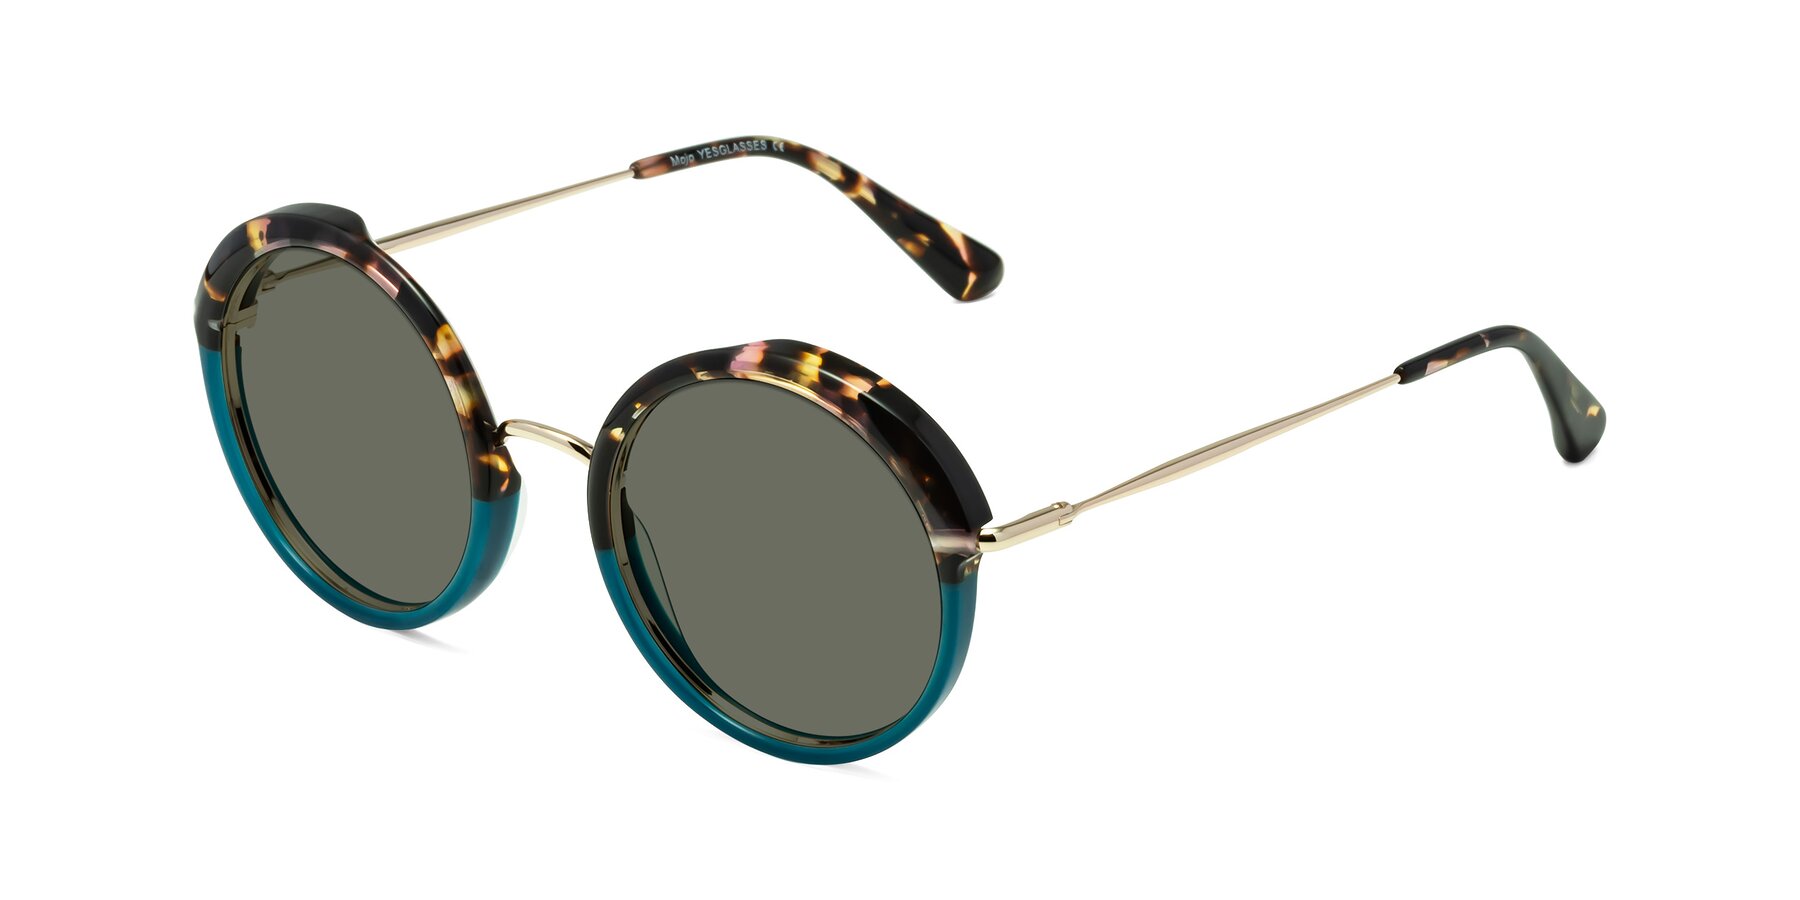 Angle of Mojo in Floral-Teal with Gray Polarized Lenses